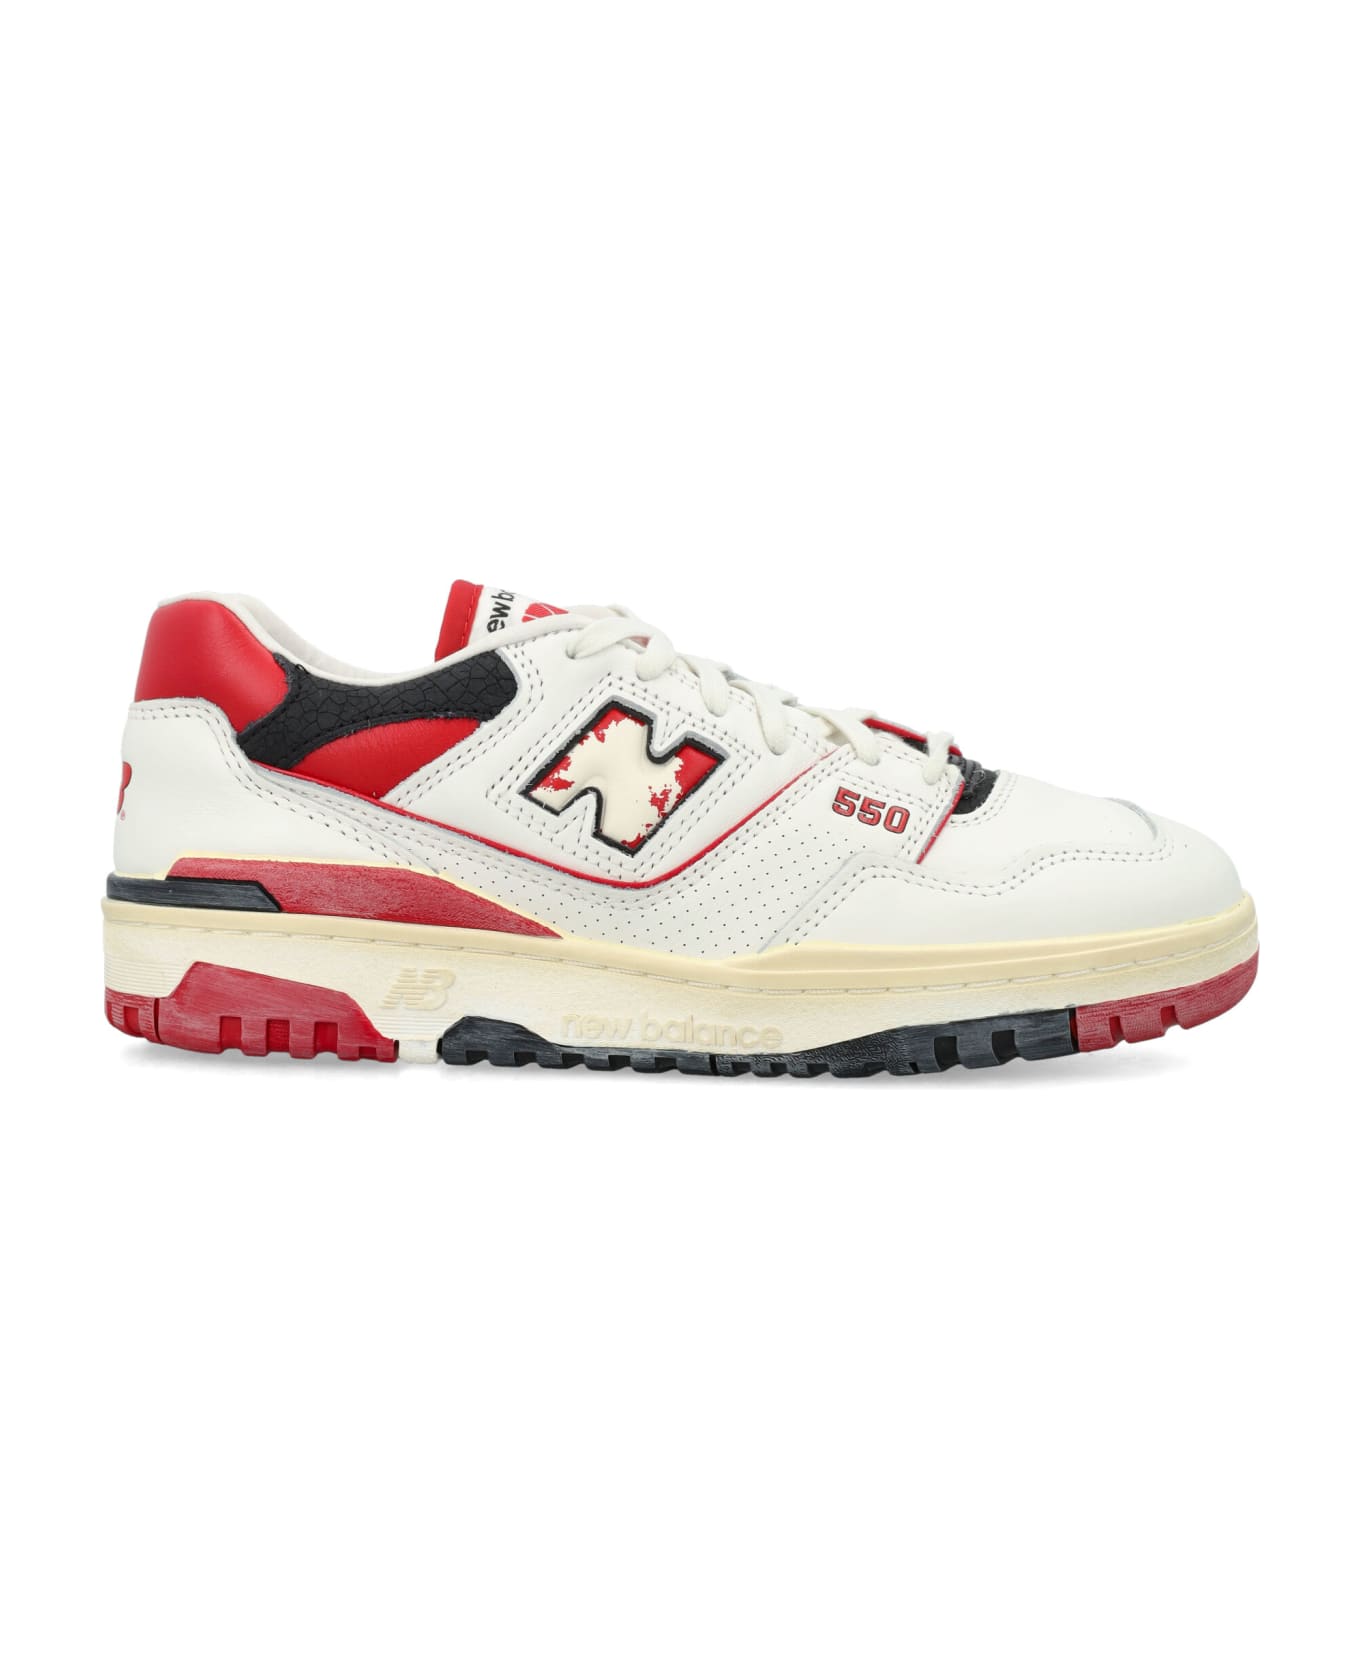 New Balance 550 Sneakers - WHITE RED